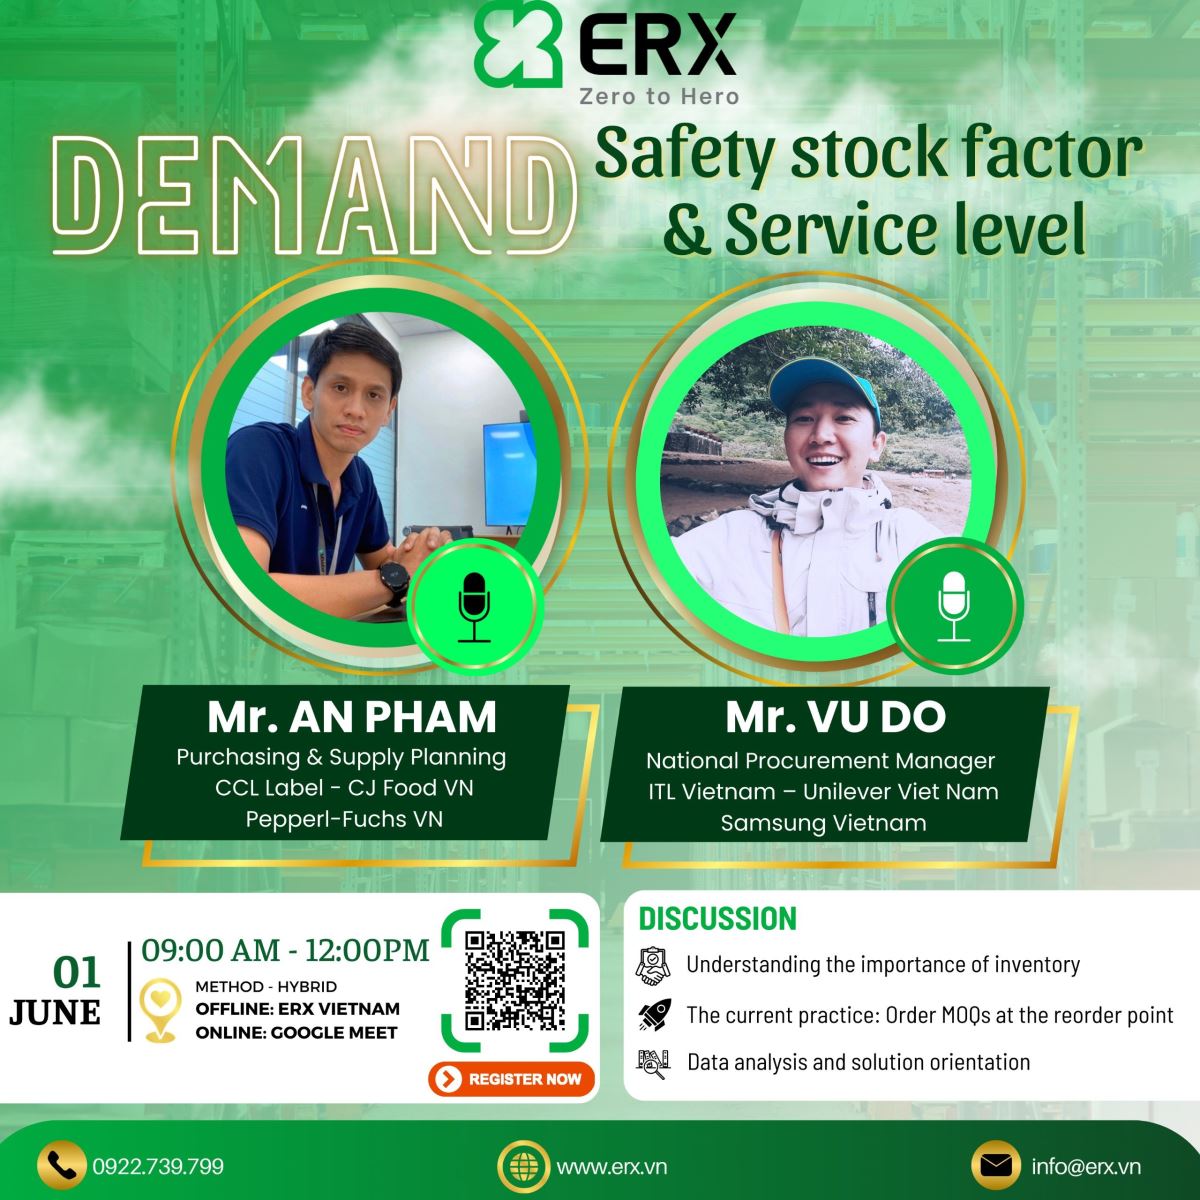 DEMAND: SAFETY STOCK FACTOR & SERVICE LEVEL